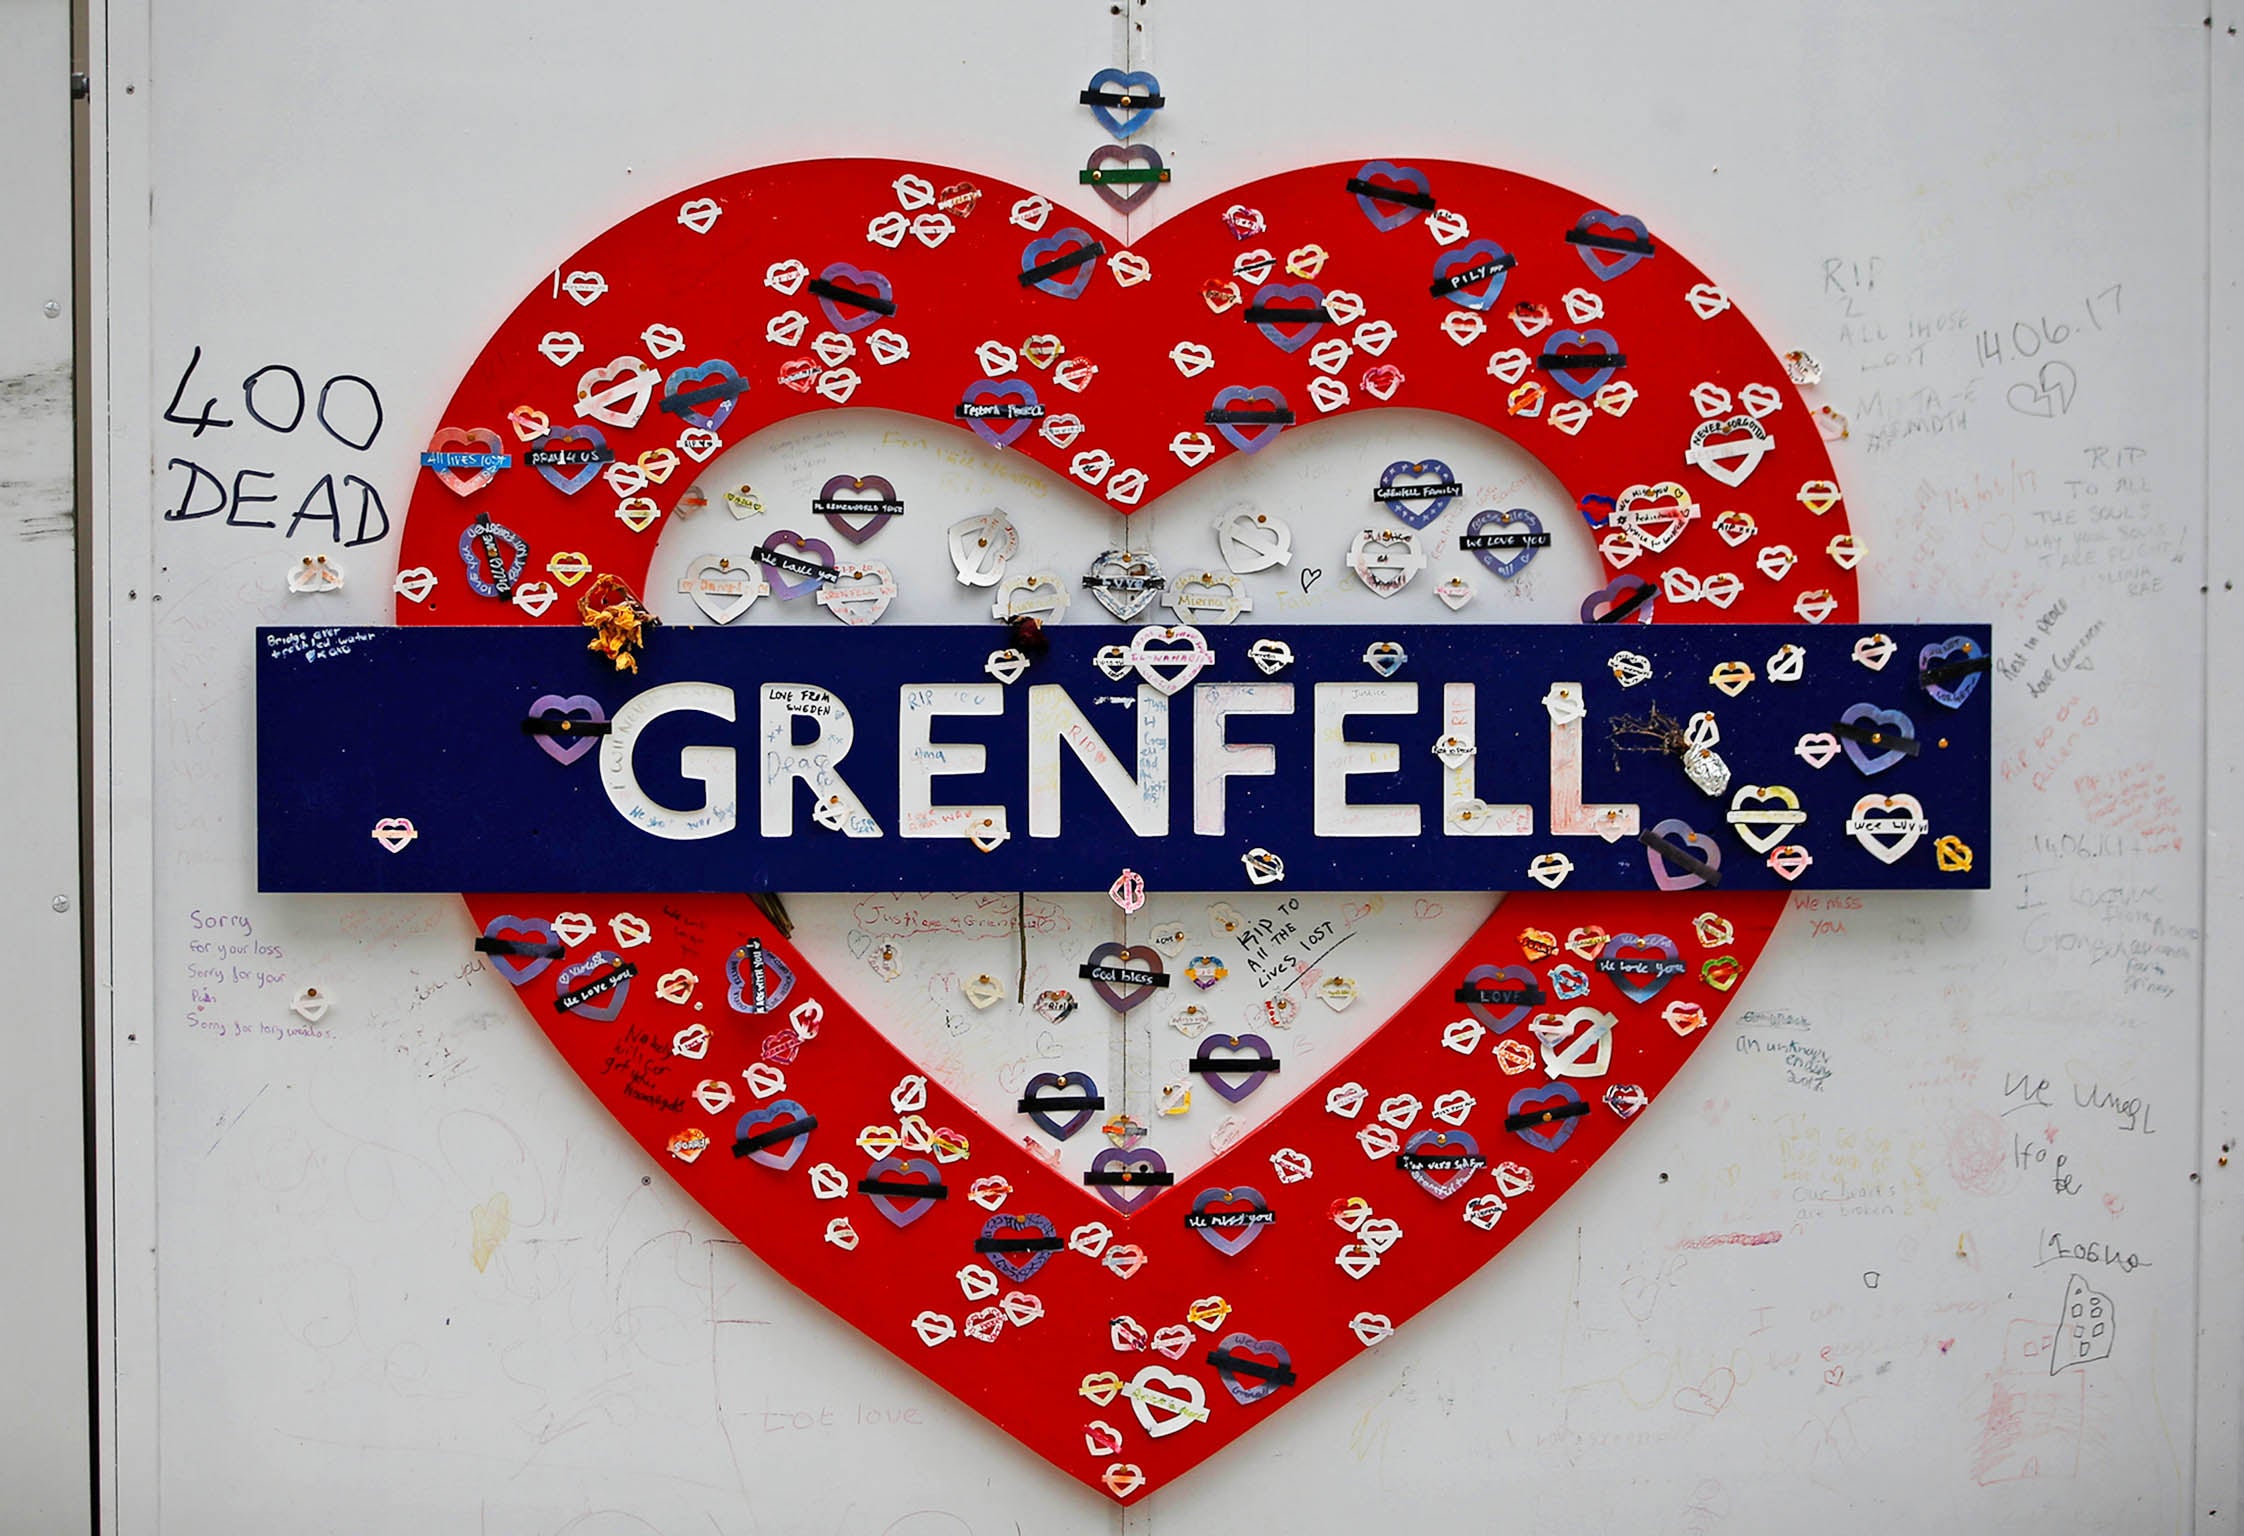 A tribute hangs from a hoarding surrounding Grenfell Tower on the day of a commemoration hearing at the opening of the inquiry into the disaster at the tower, in west London